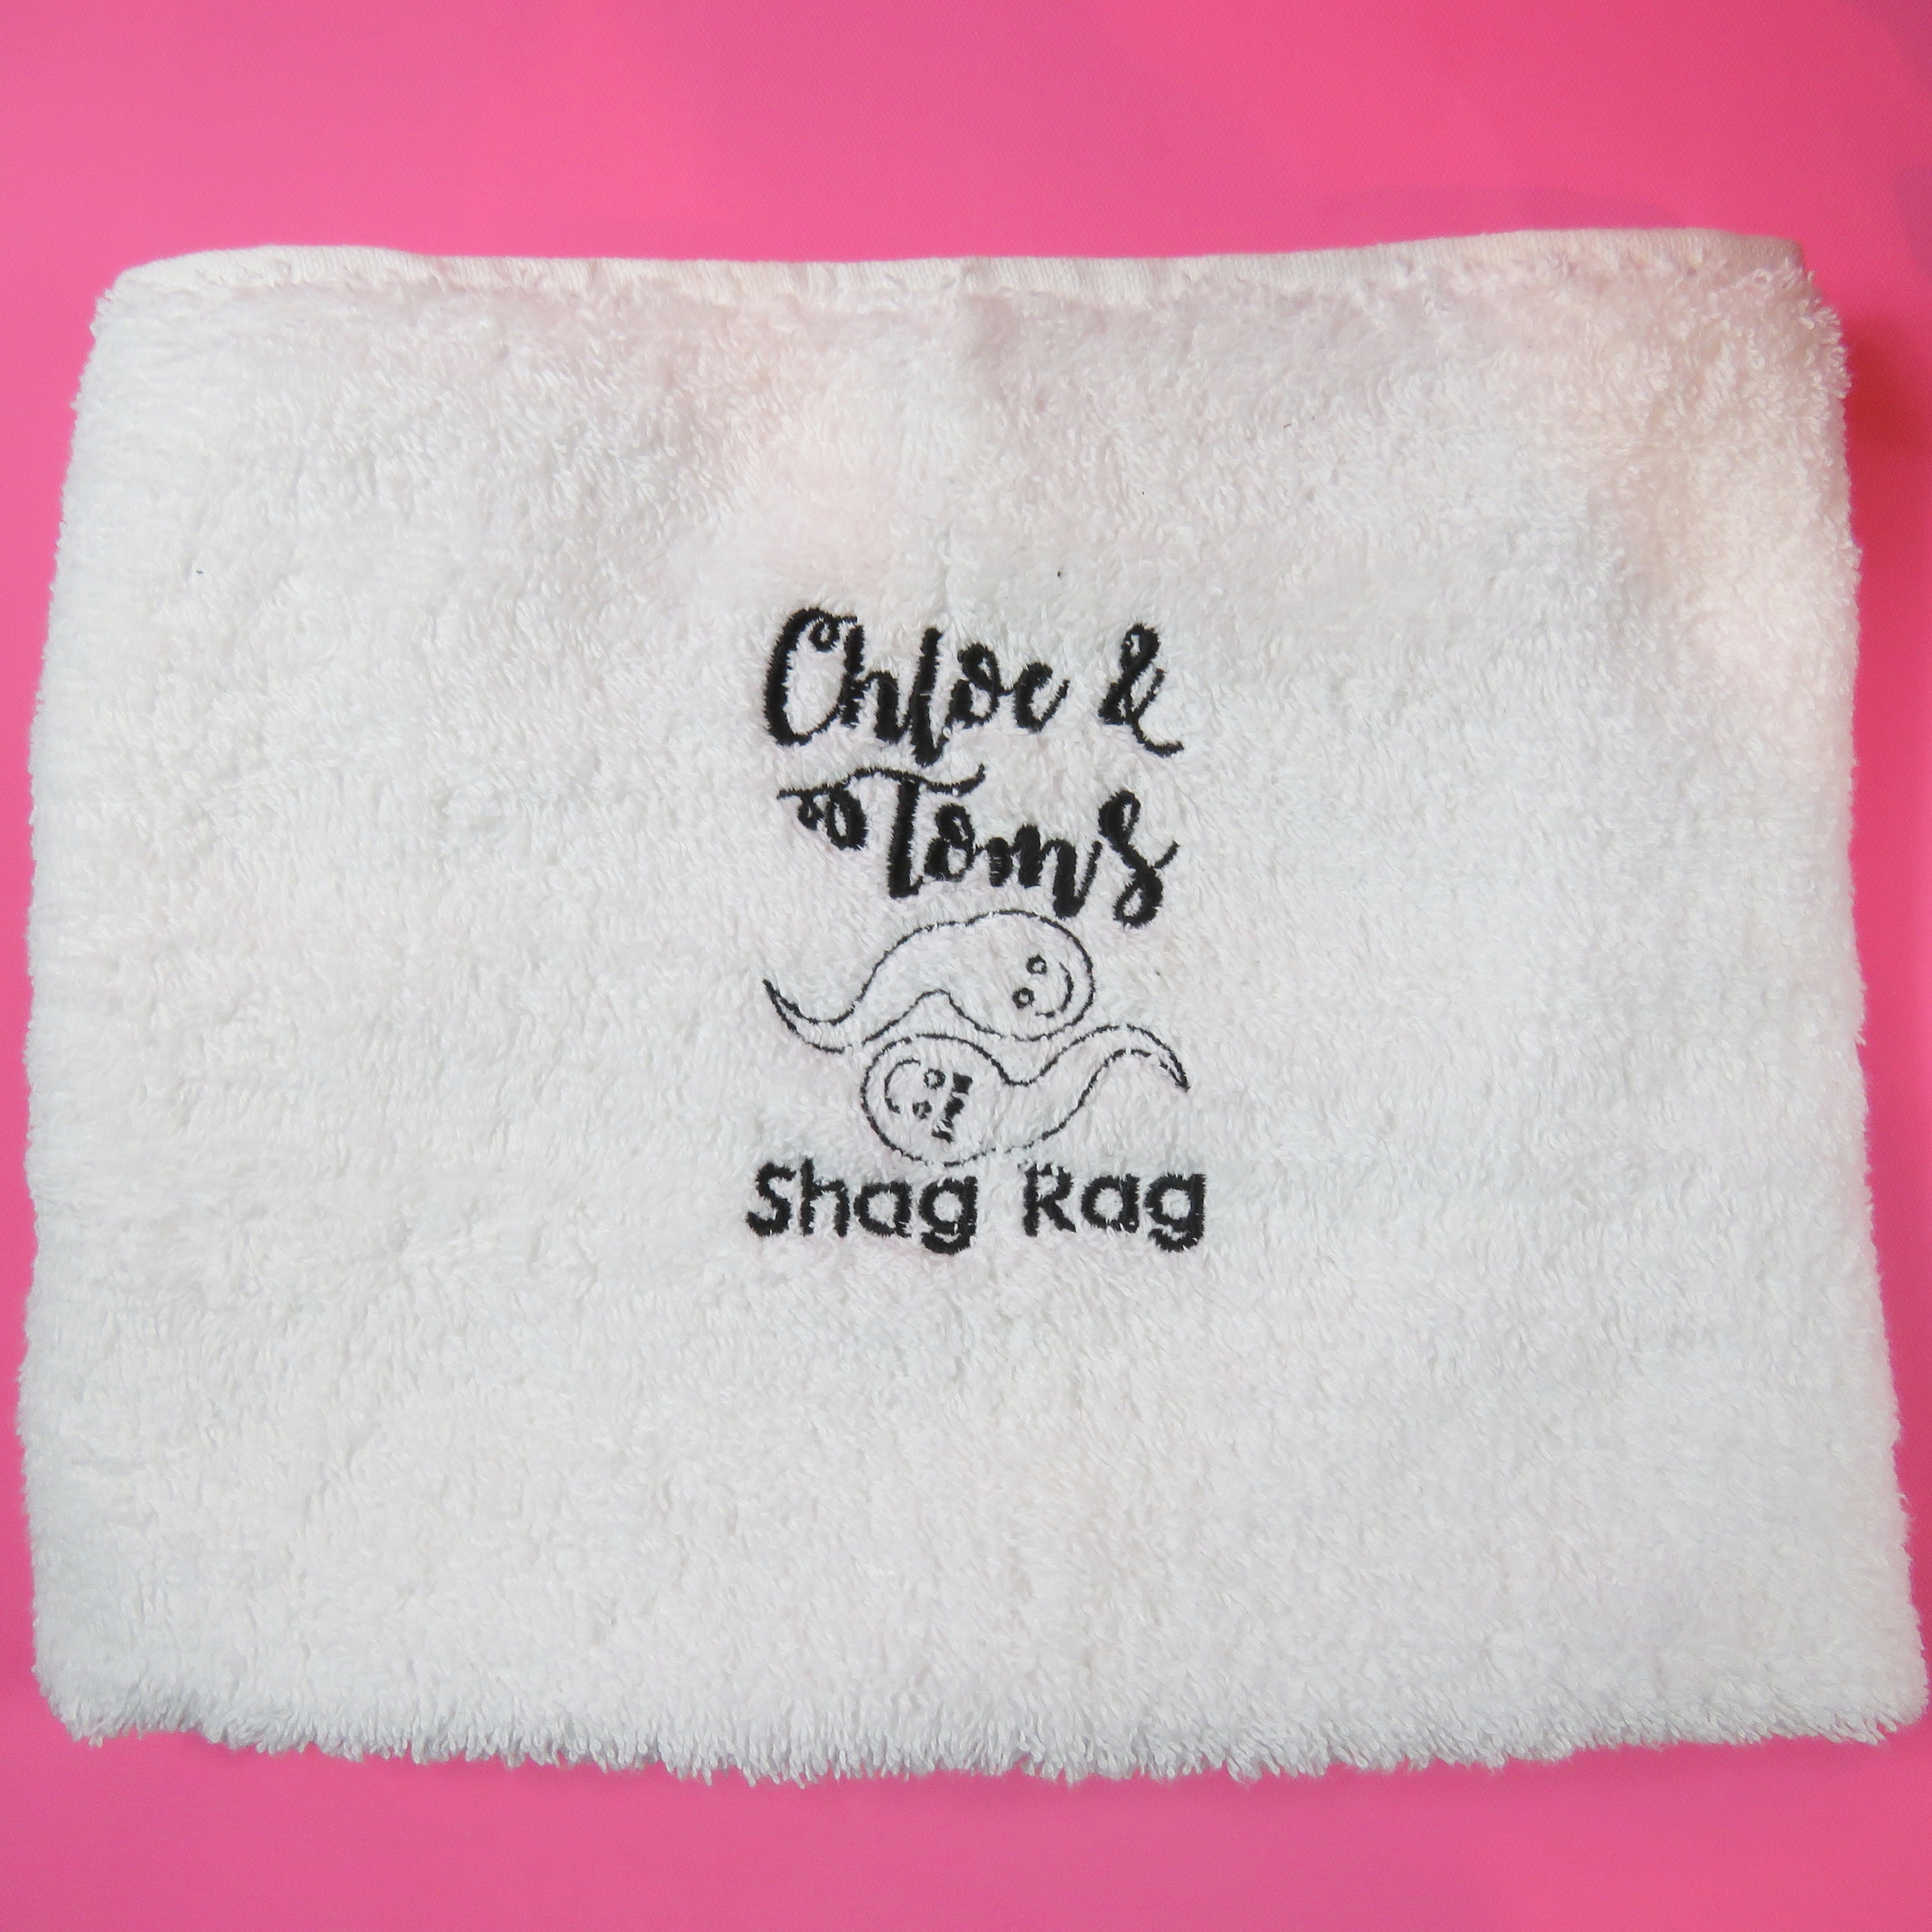 Shag Rag Wank Wipe Hand Towel Gift for Couples Sex Towel Funny